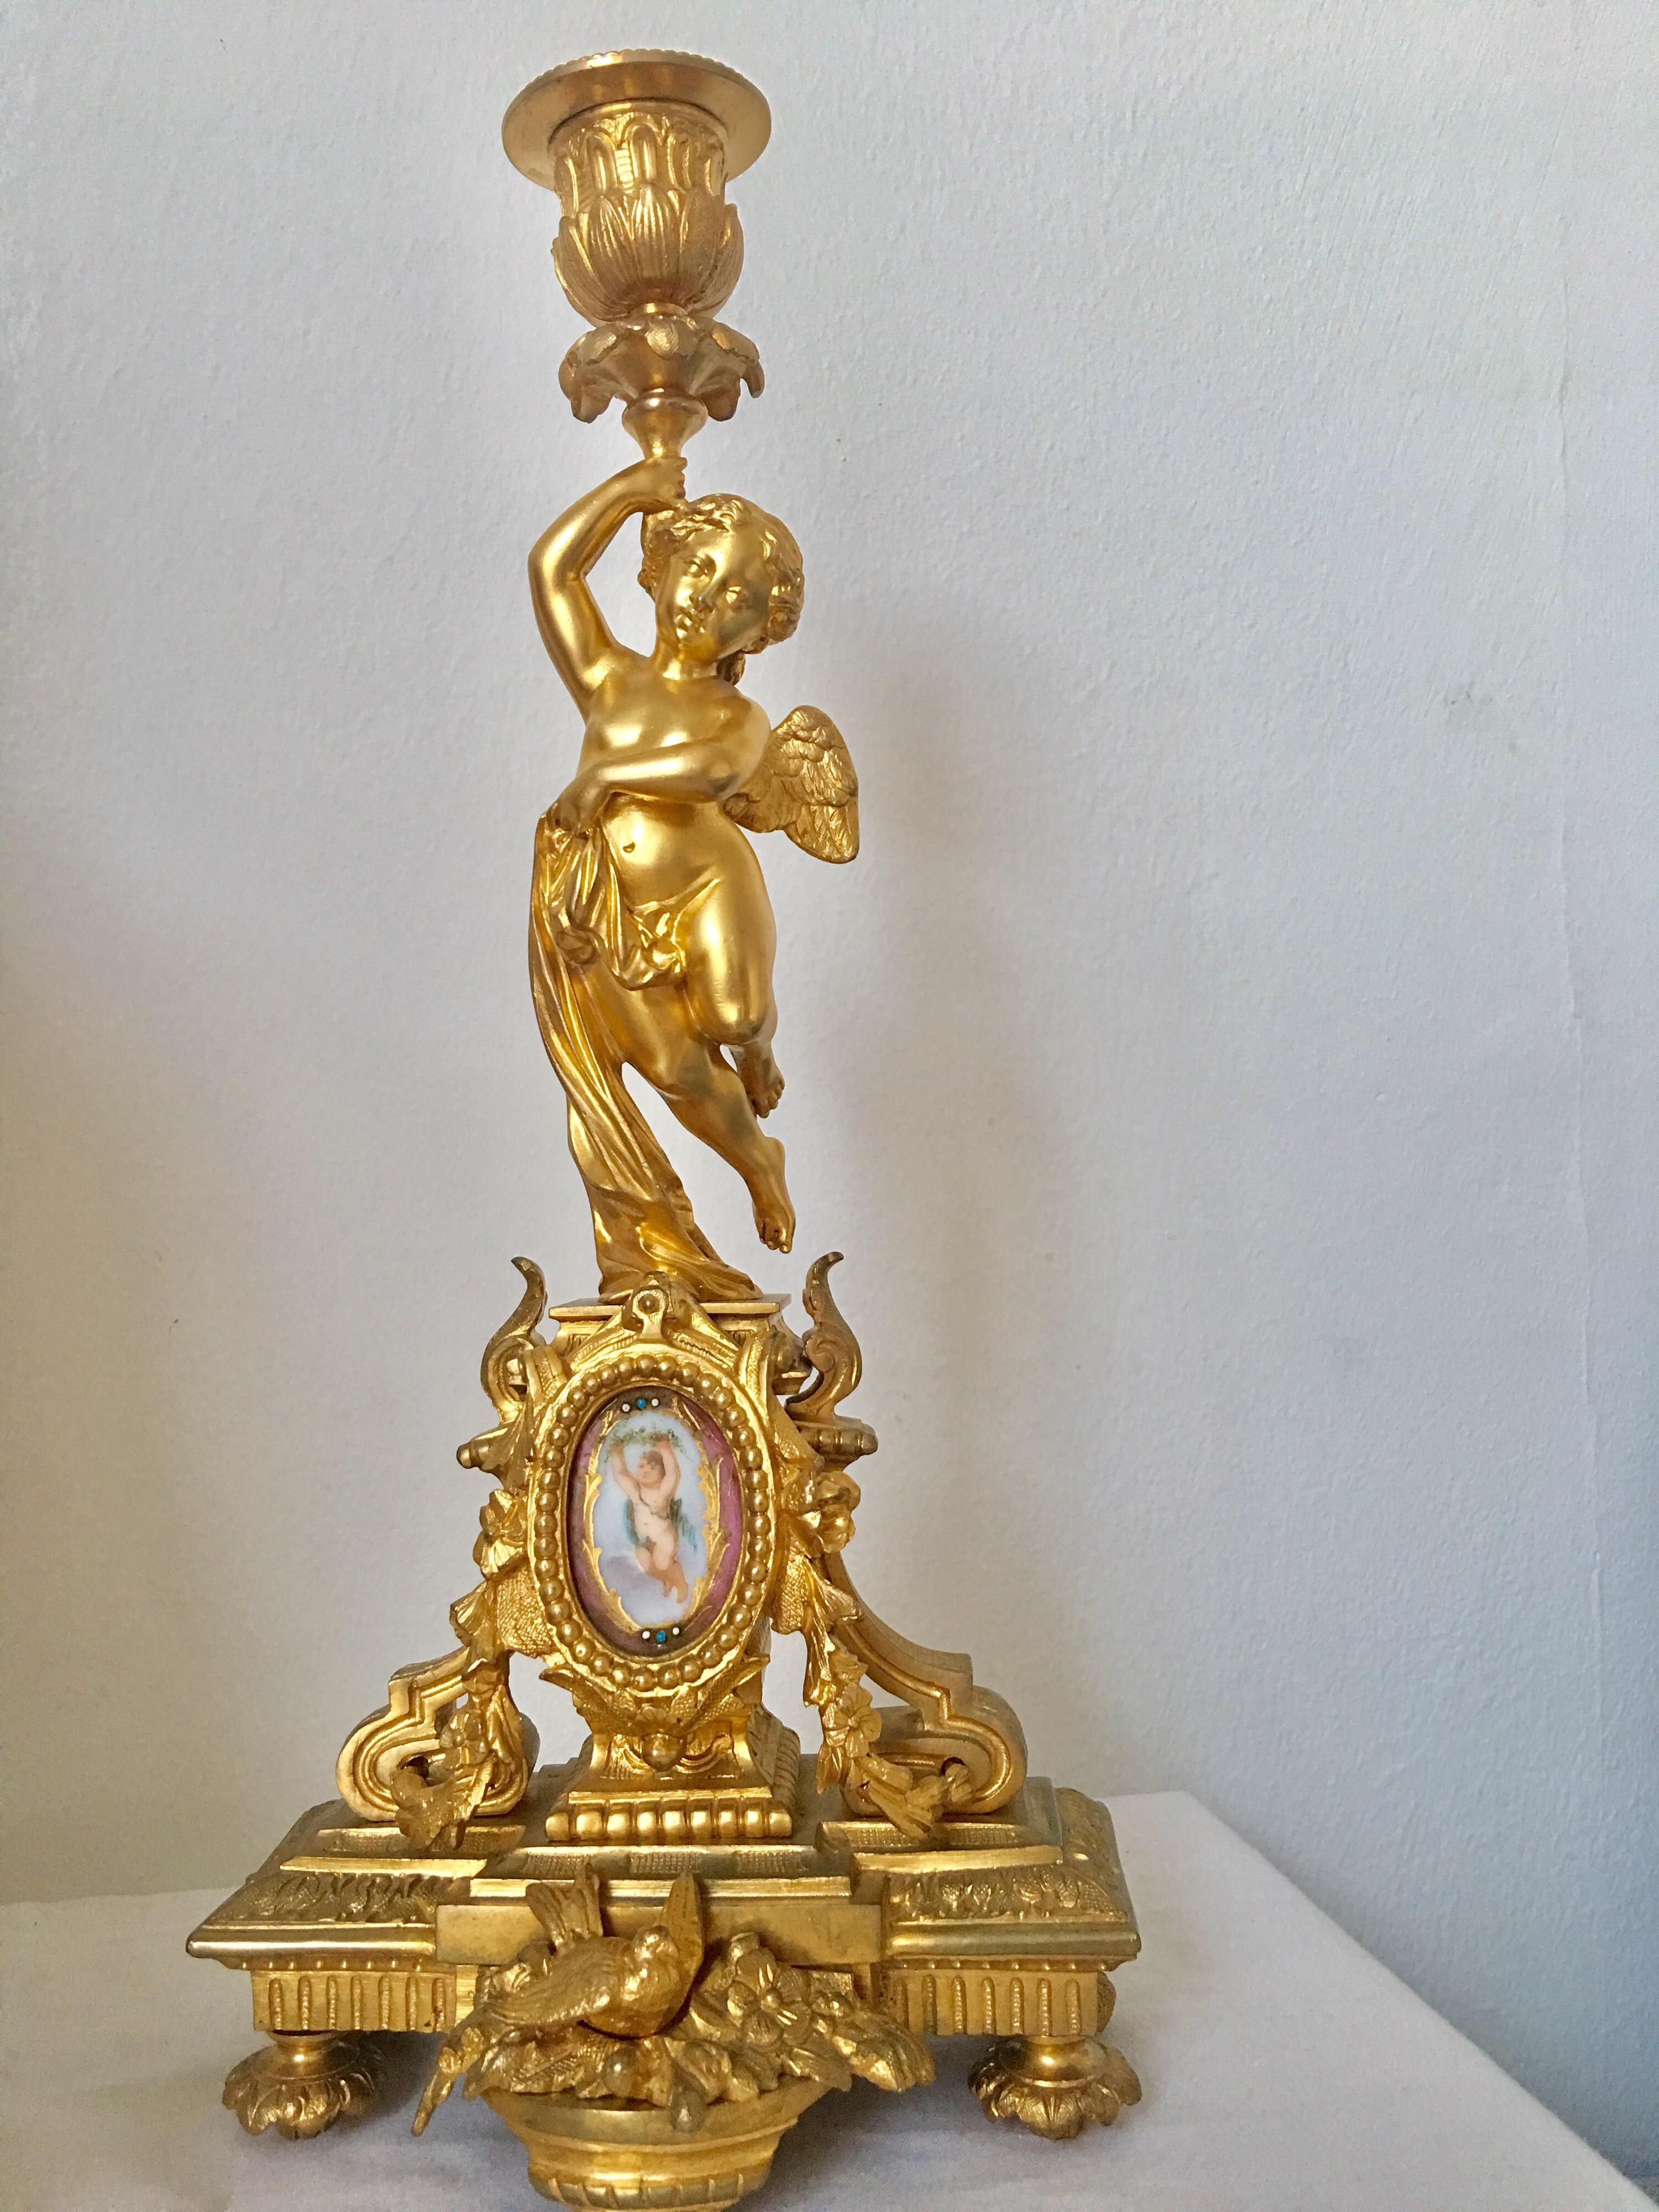 3pcs Set Porcelain Ormolu French Clock Signed Howell James & Co. “To the Queen” In Good Condition For Sale In London, Nottinghill